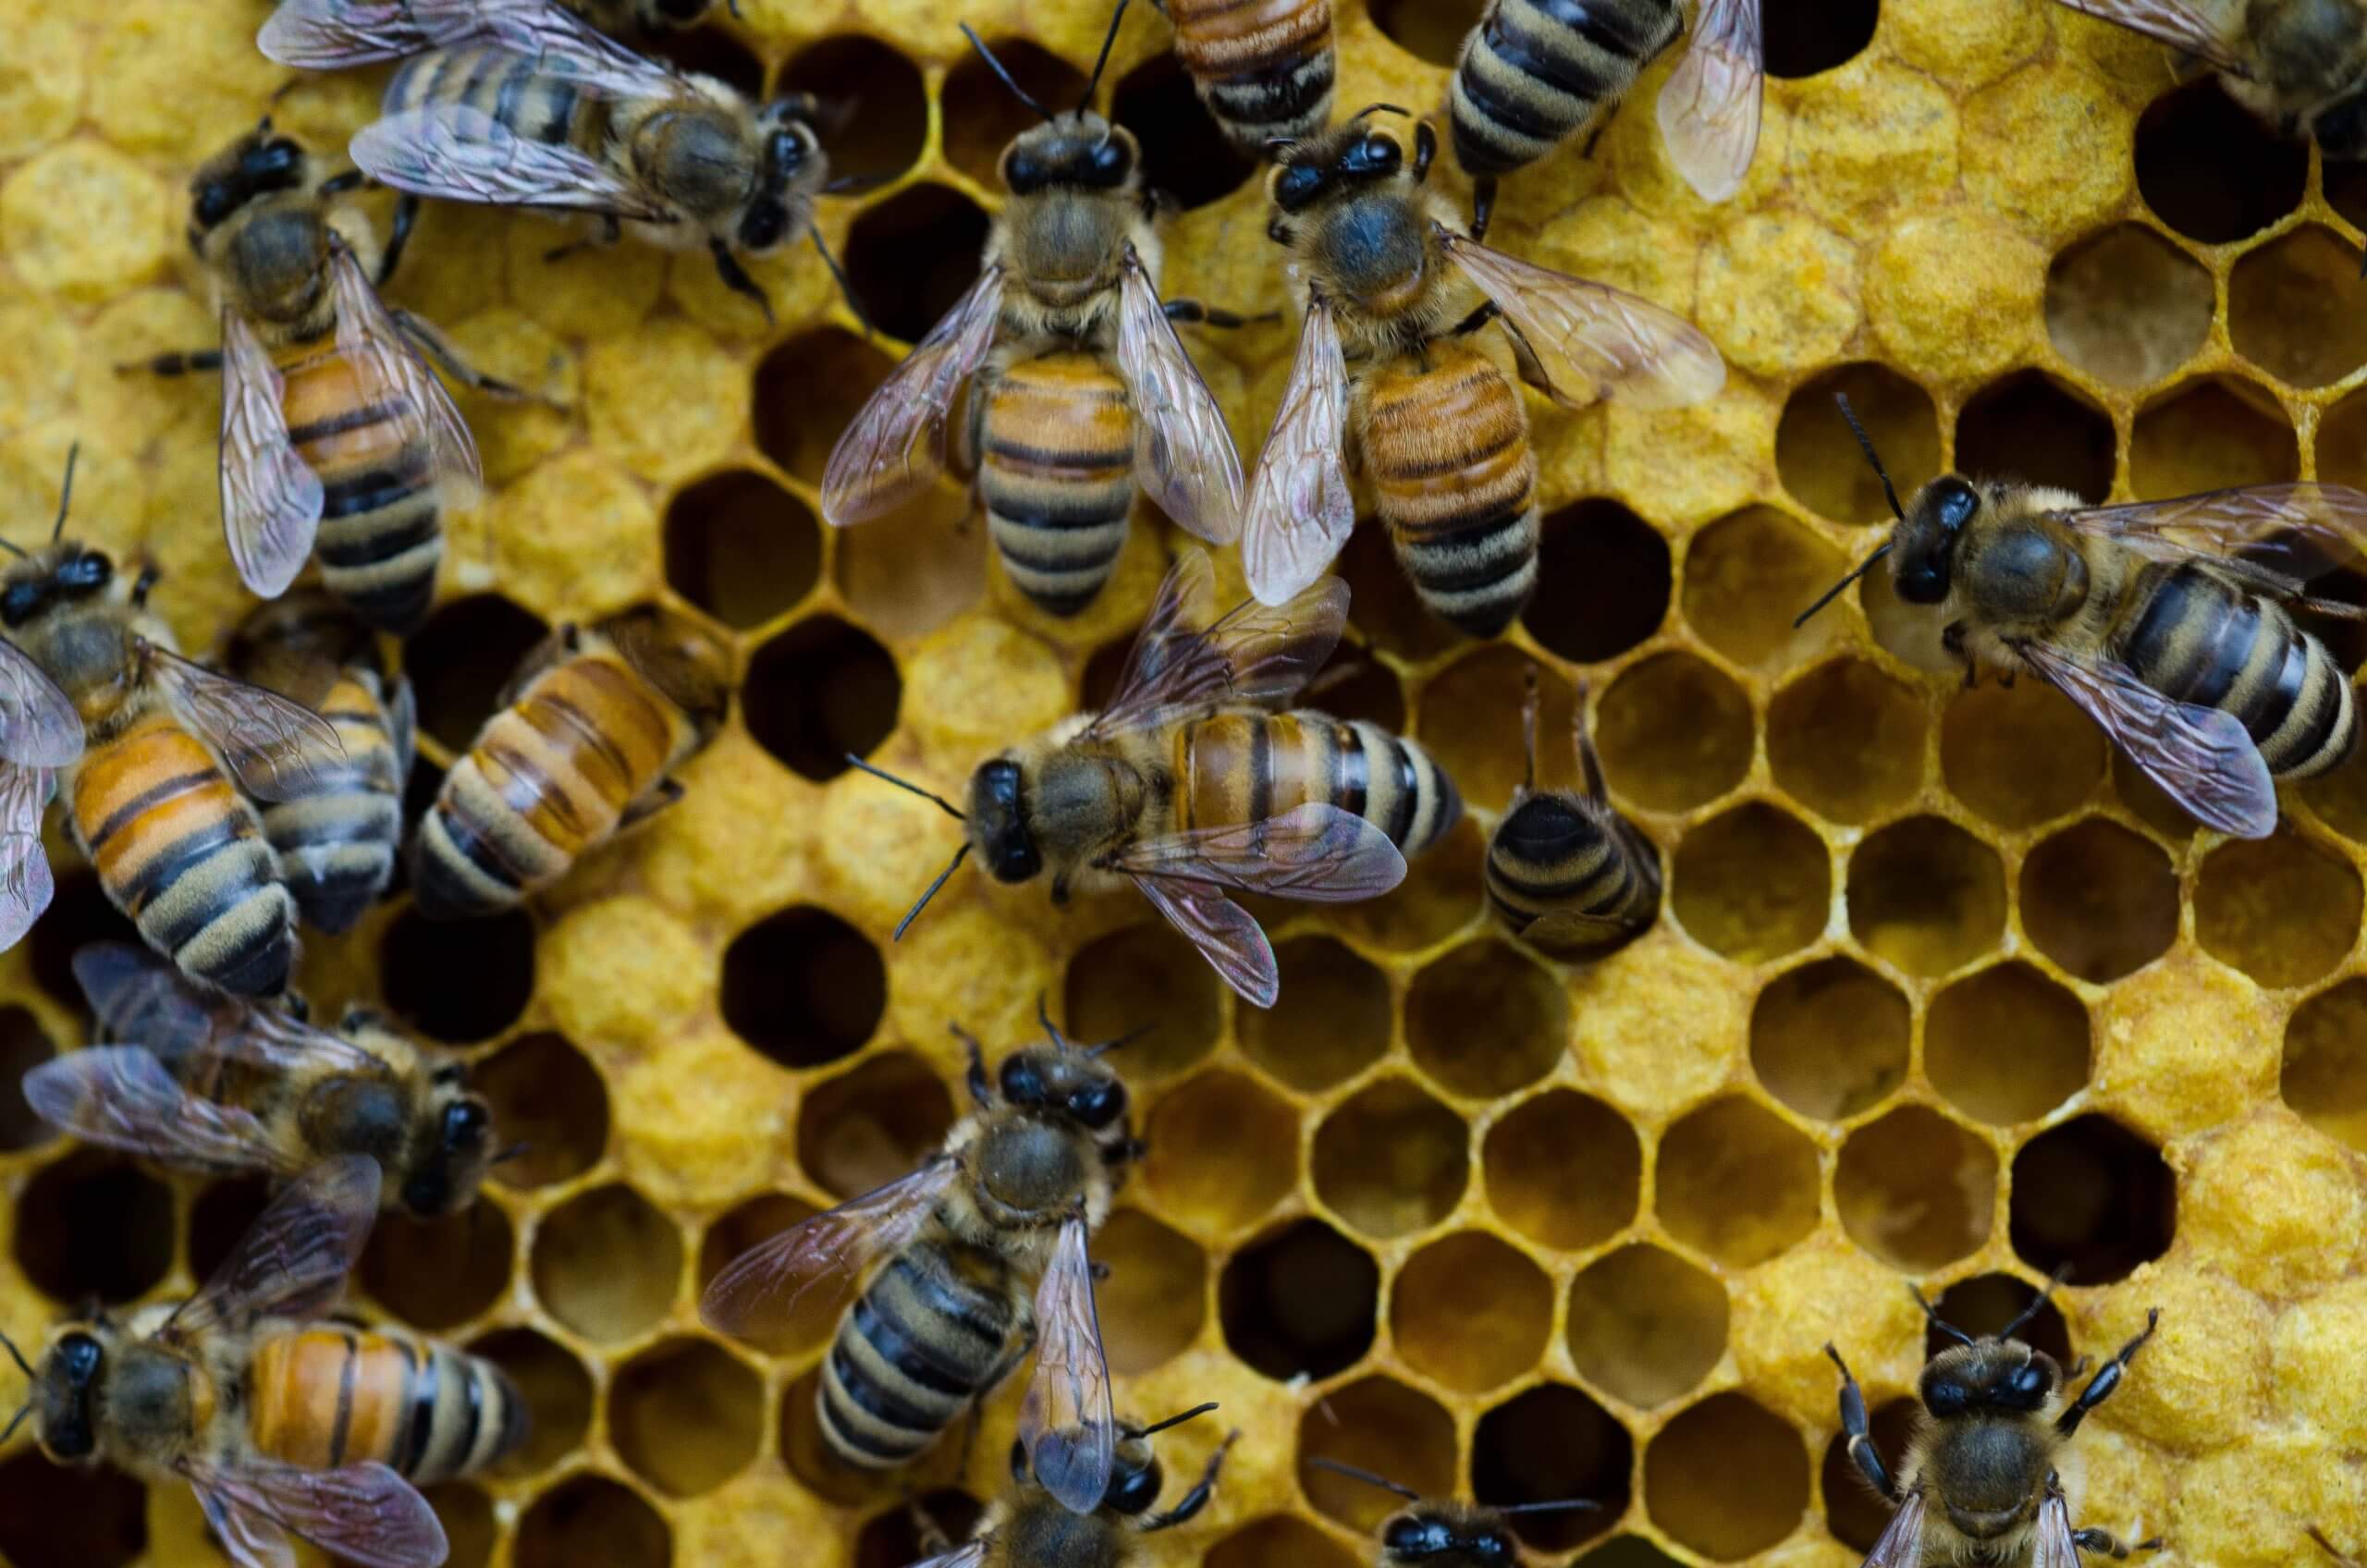 Bt insect toxin in GM crops ‘has no negative effects on honey bees,’ study confirms